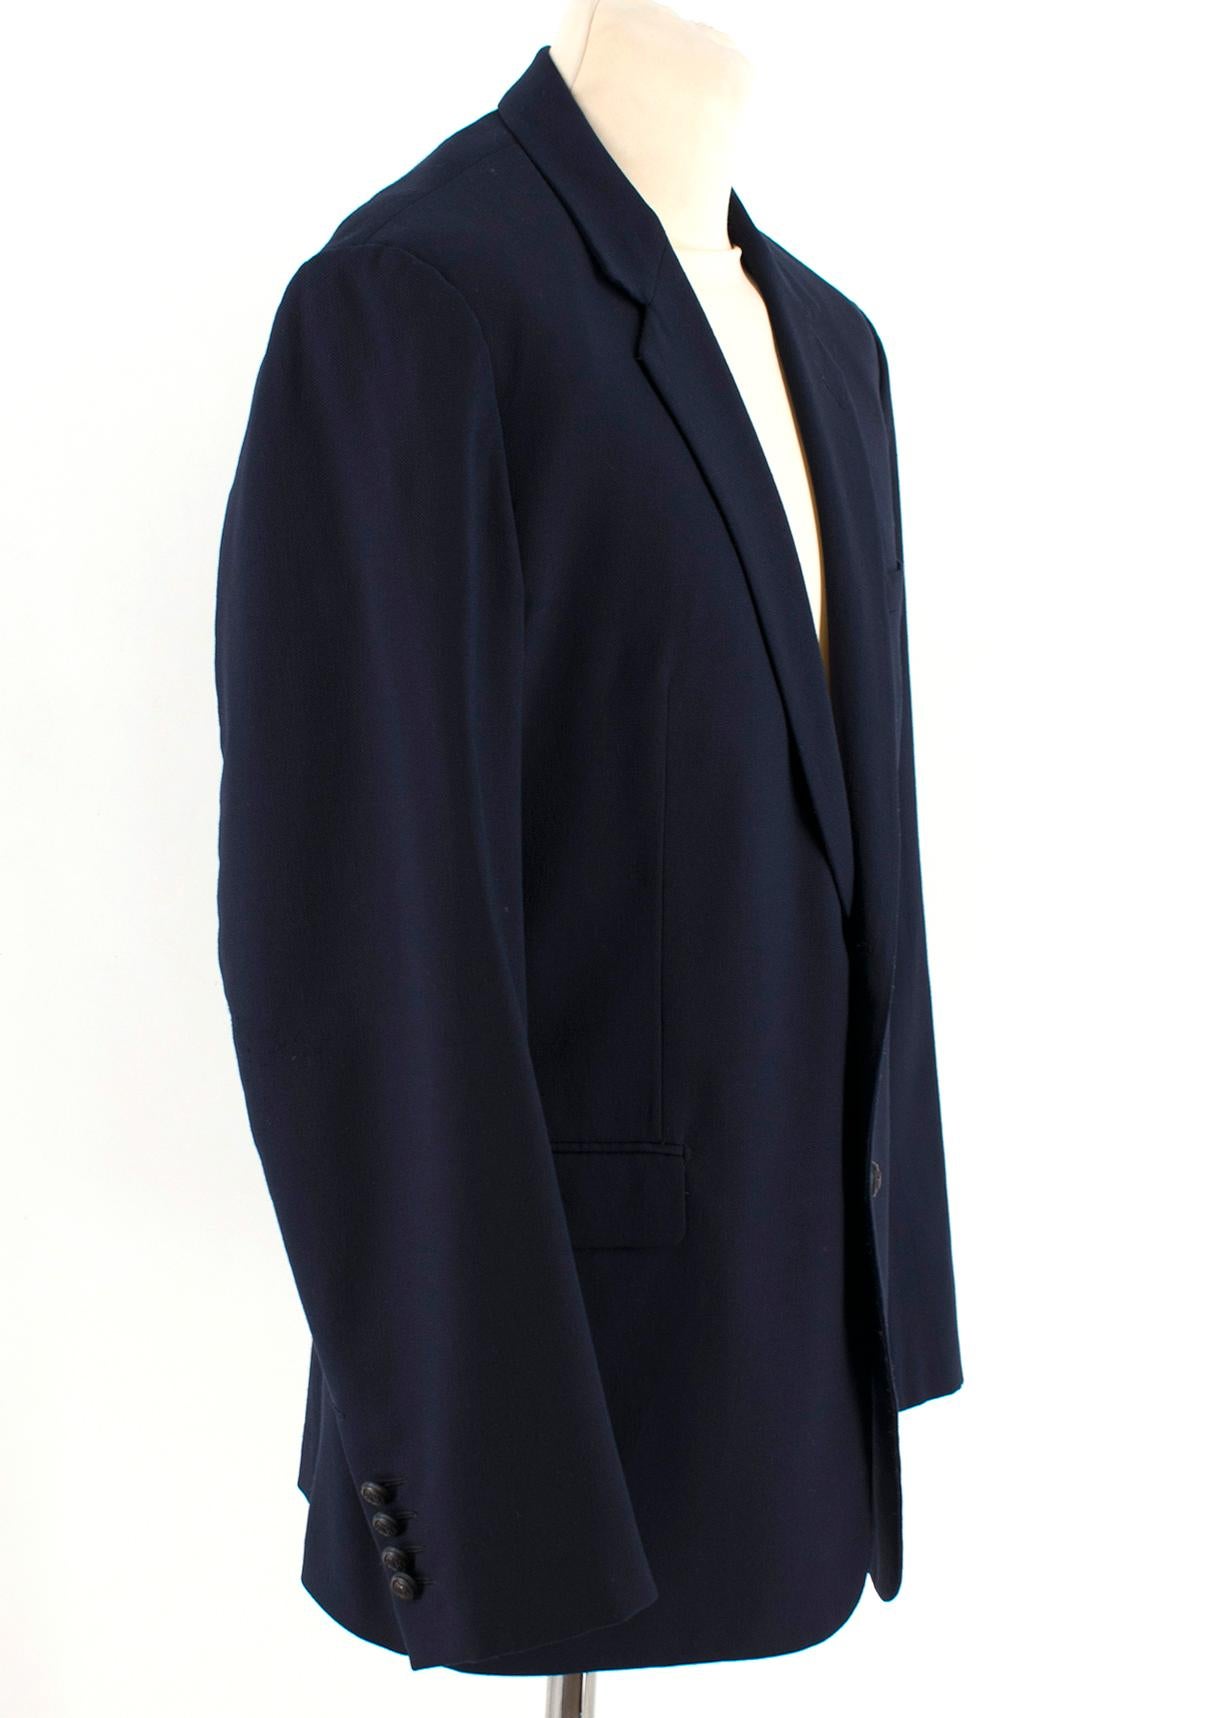 Dior Homme Navy Wool Blazer

Blue single breasted blazer jacket,
Long sleeves,
Front flap pockets,
Front chest welt pocket,
Padded shoulders,
Standard notch lapel collar,
Single back vent,
Button up cuffs


Please note, these items are pre-owned and